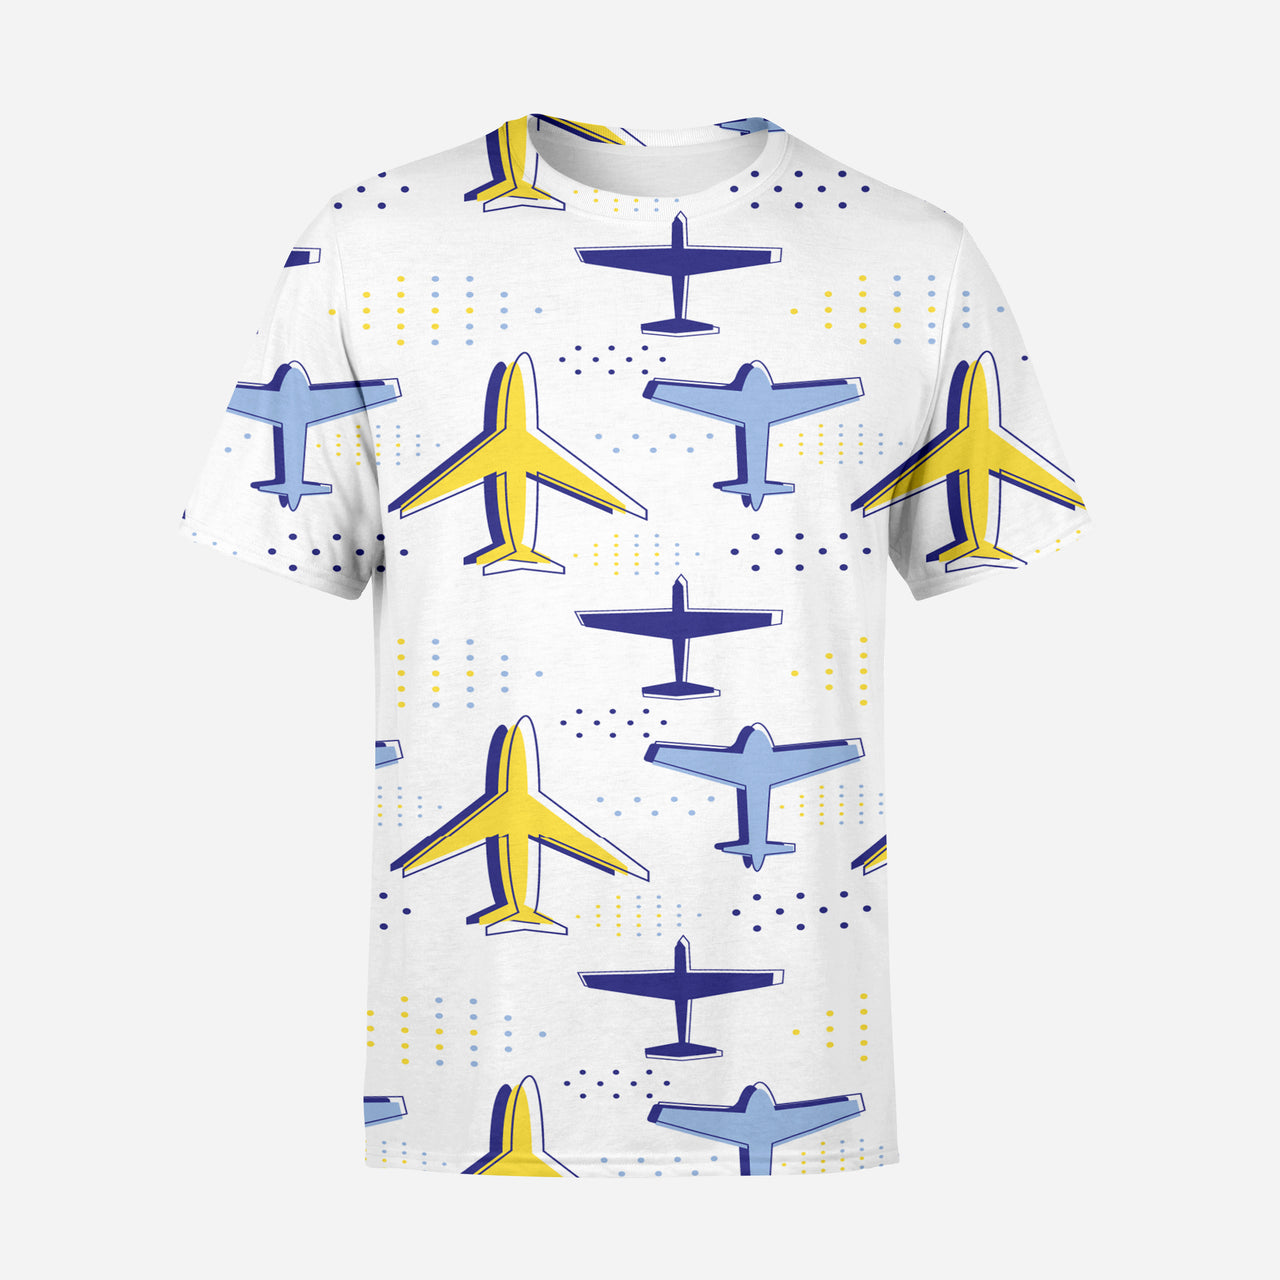 Very Colourful Airplanes Designed 3D T-Shirts